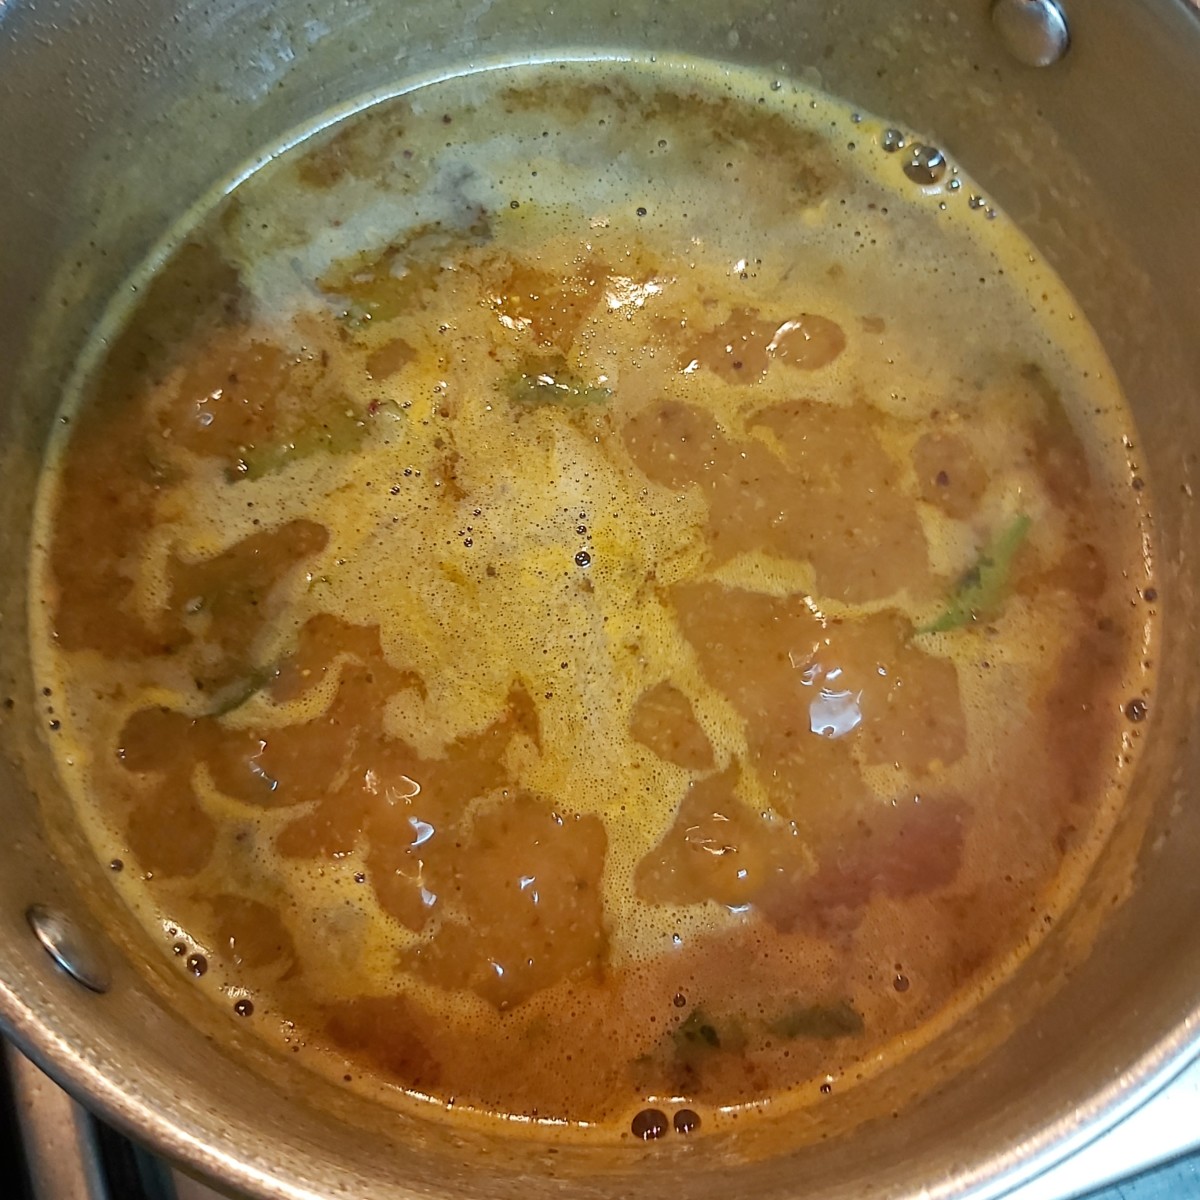 If the rasam is too thick, add more water. Adjust salt and boil till the spices are well absorbed.